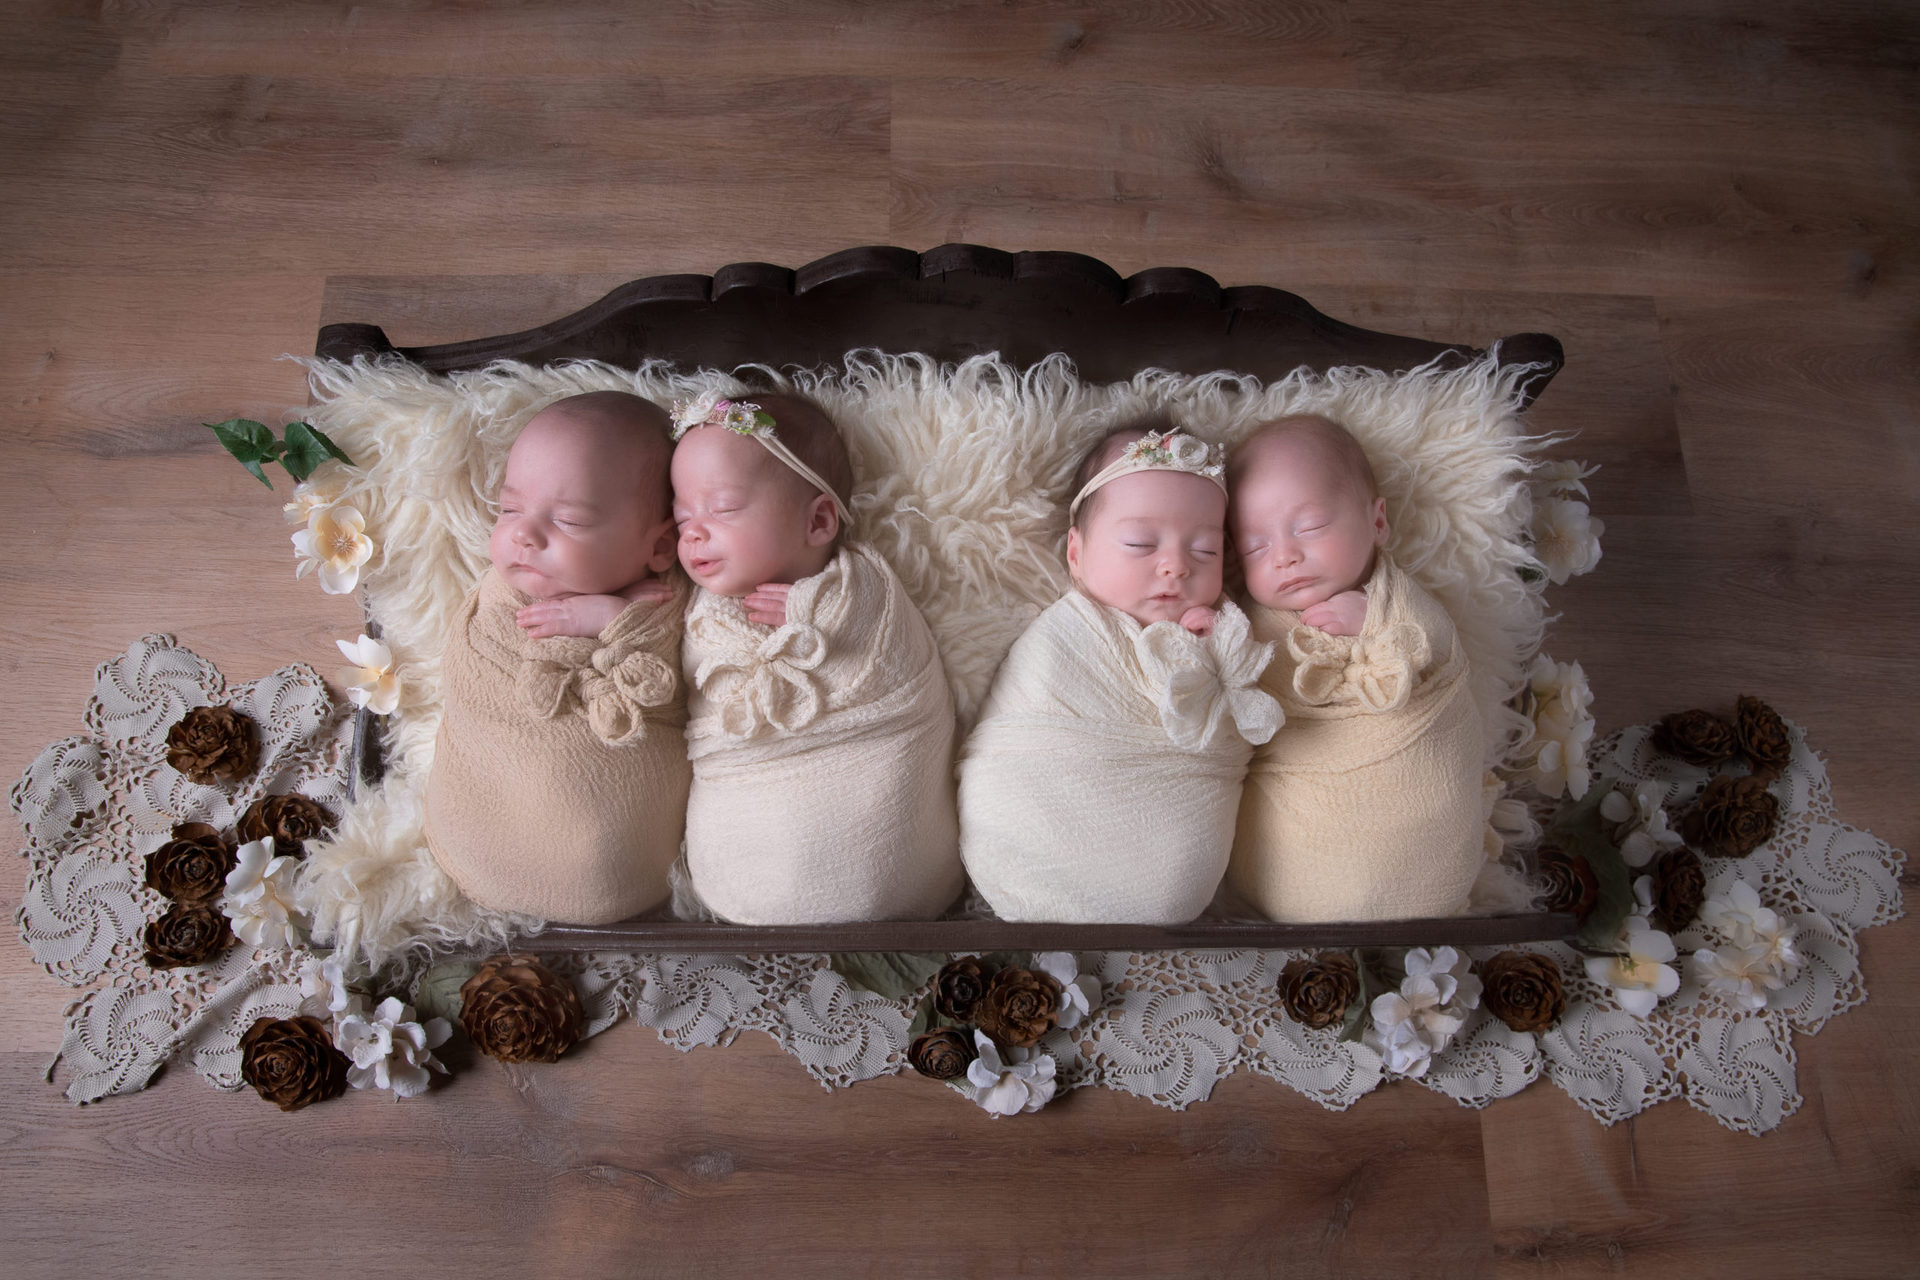 4 newborns siblings rest on a wood bed prop. 2 of them wearing light colored headbands and wraps. Two of them on darker brown wrap tones. pineapples decorate the scene. 90 degrees angle shot.